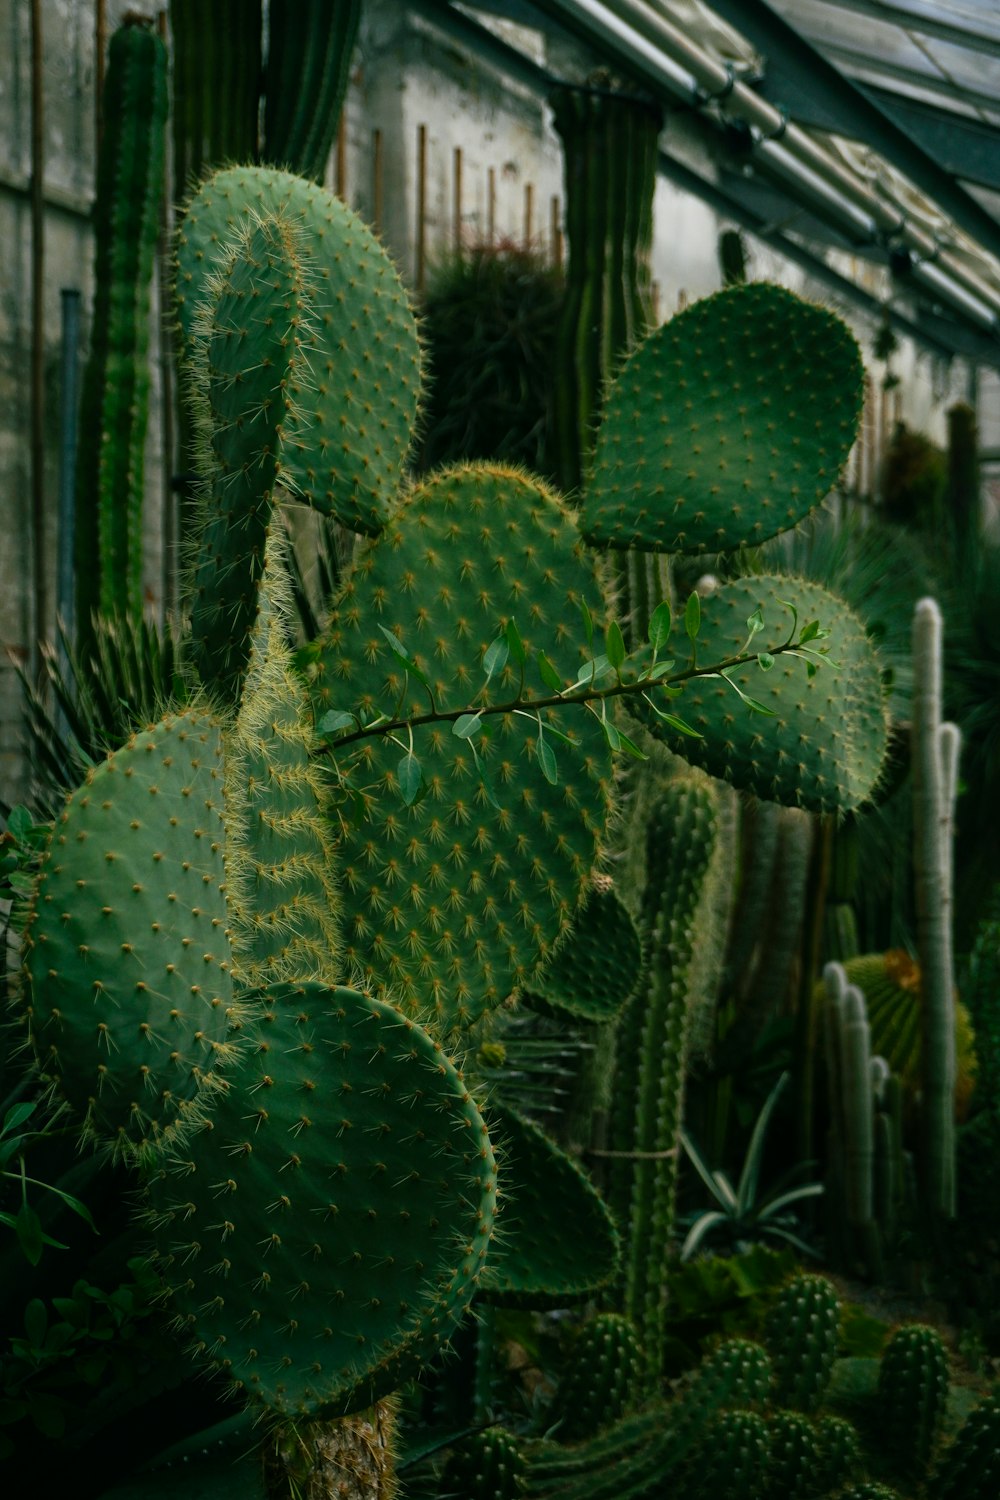 a cactus in a greenhouse with lots of green plants